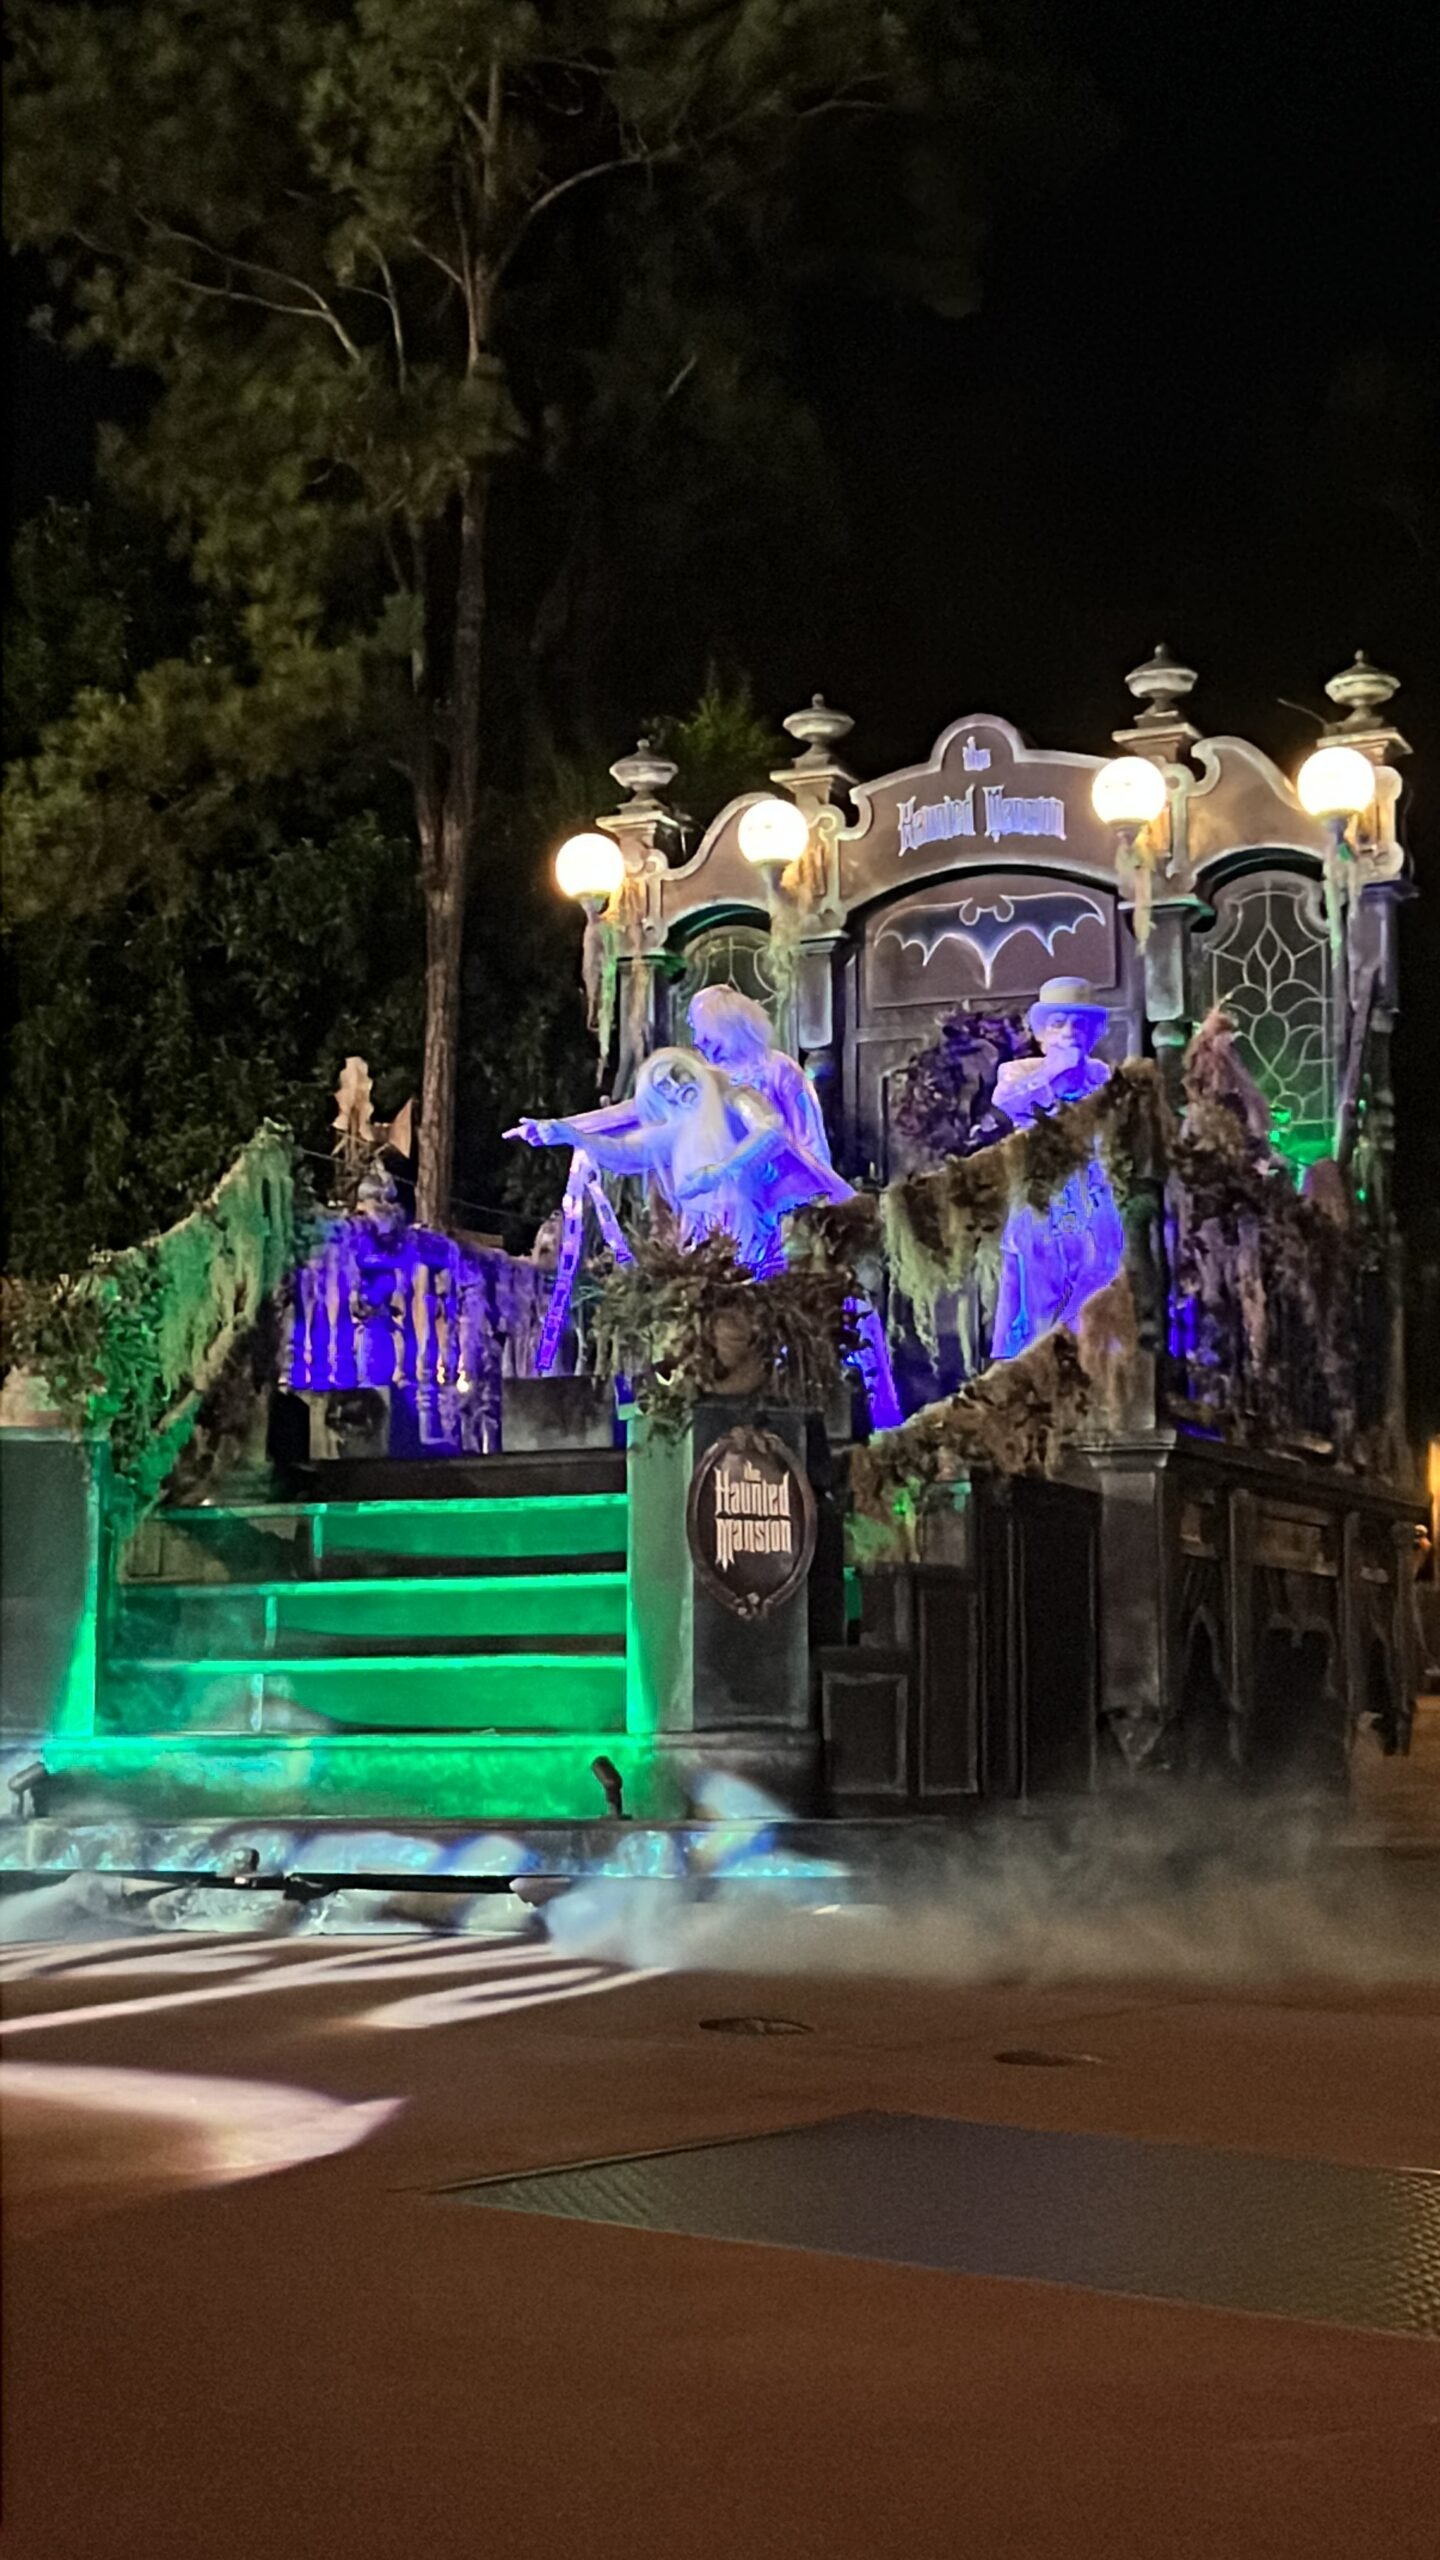 Haunted mansion ghosts in the Boo to You Parade